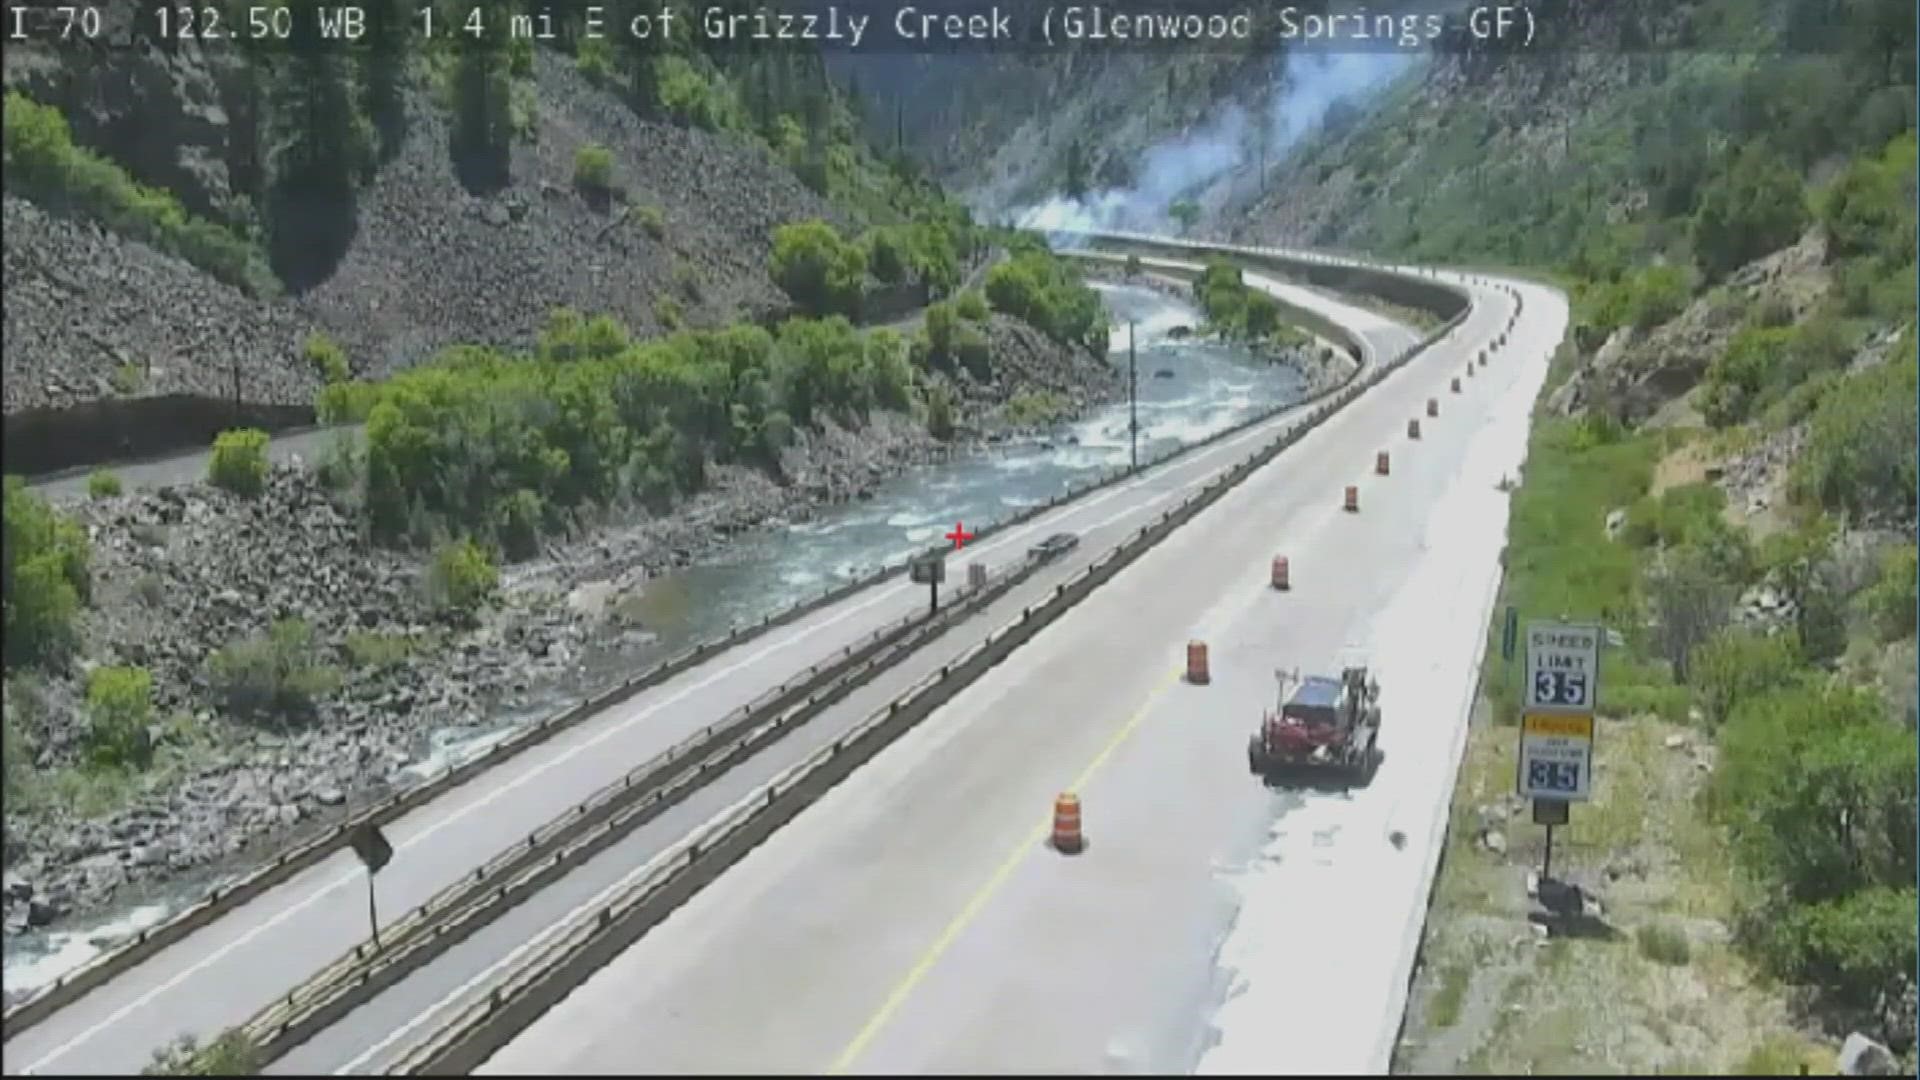 Flames were seen burning near the westbound lanes of Interstate 70.